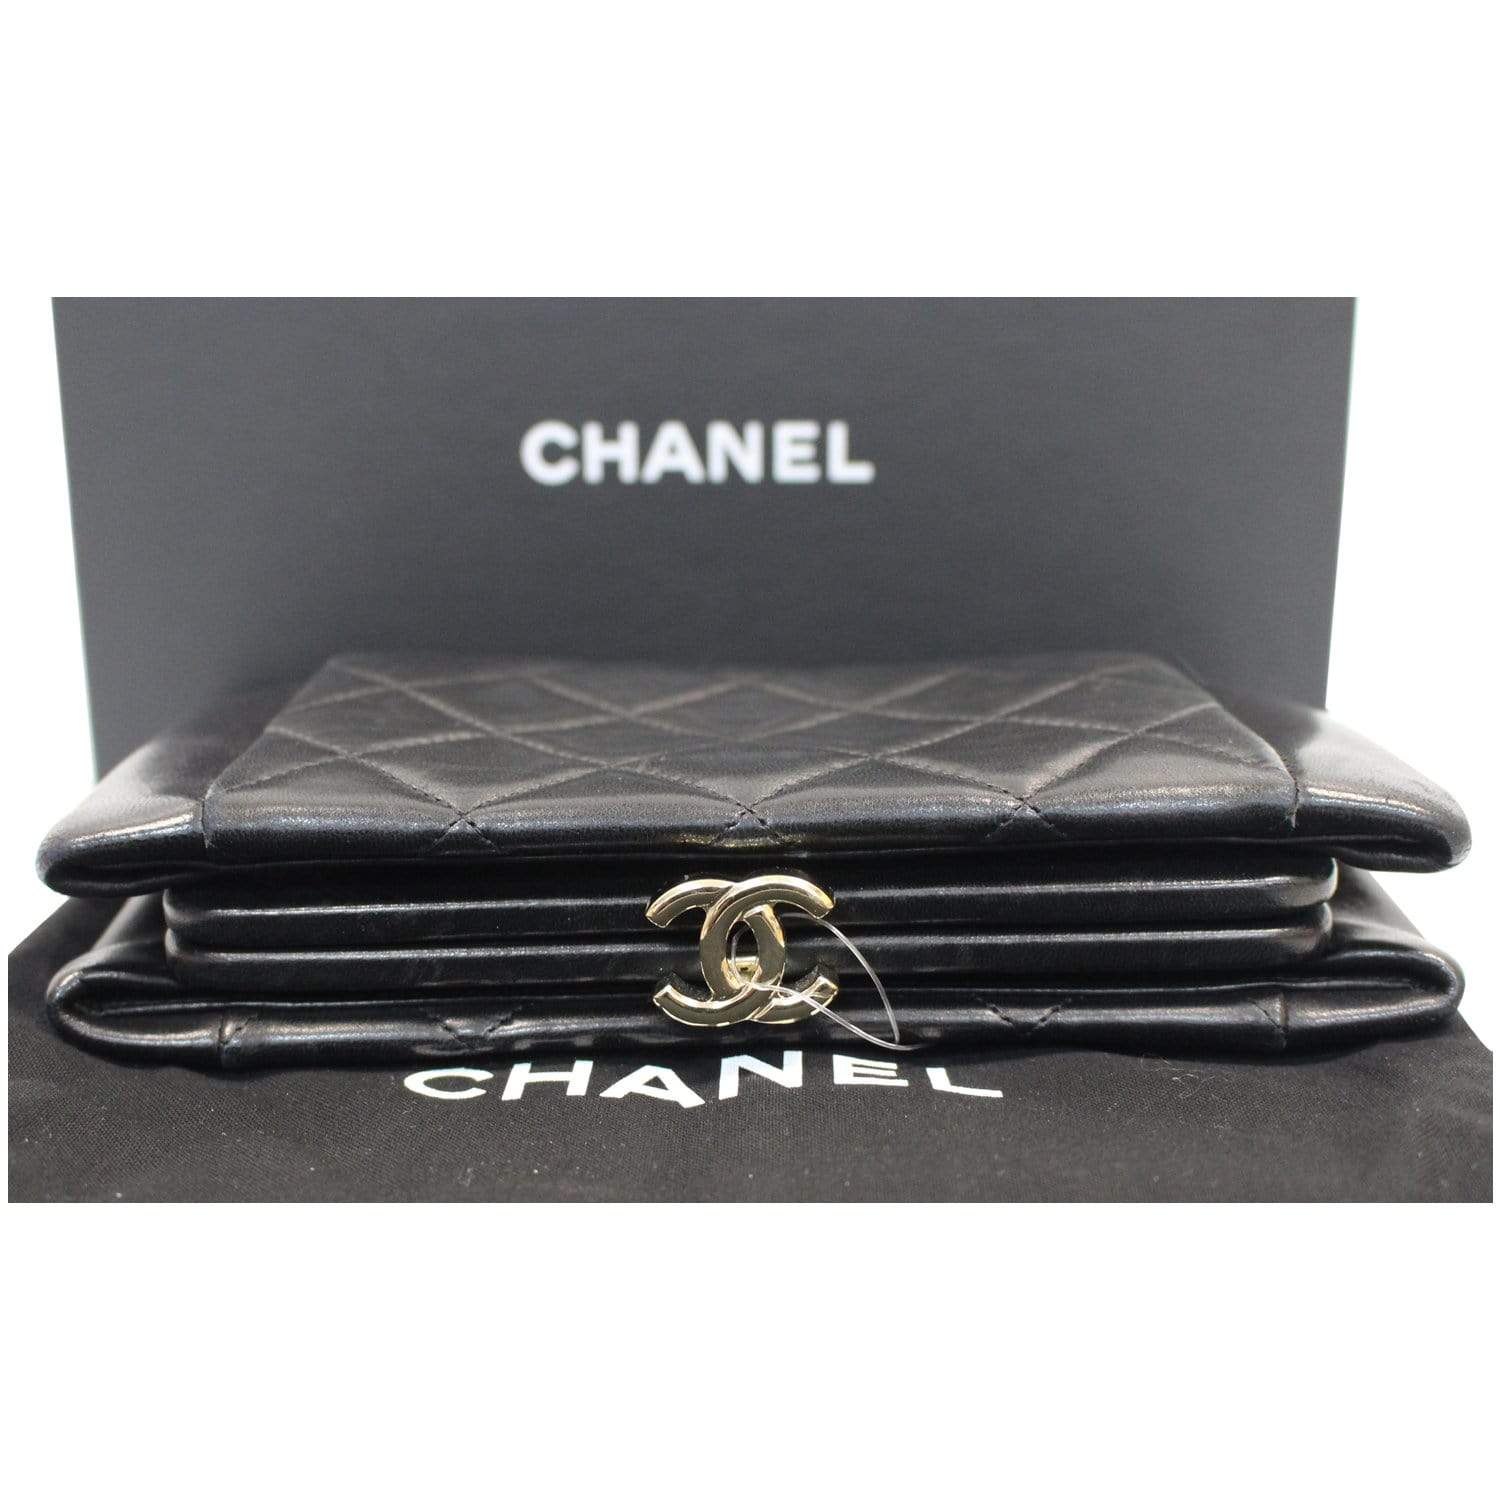 patent leather chanel flap bag